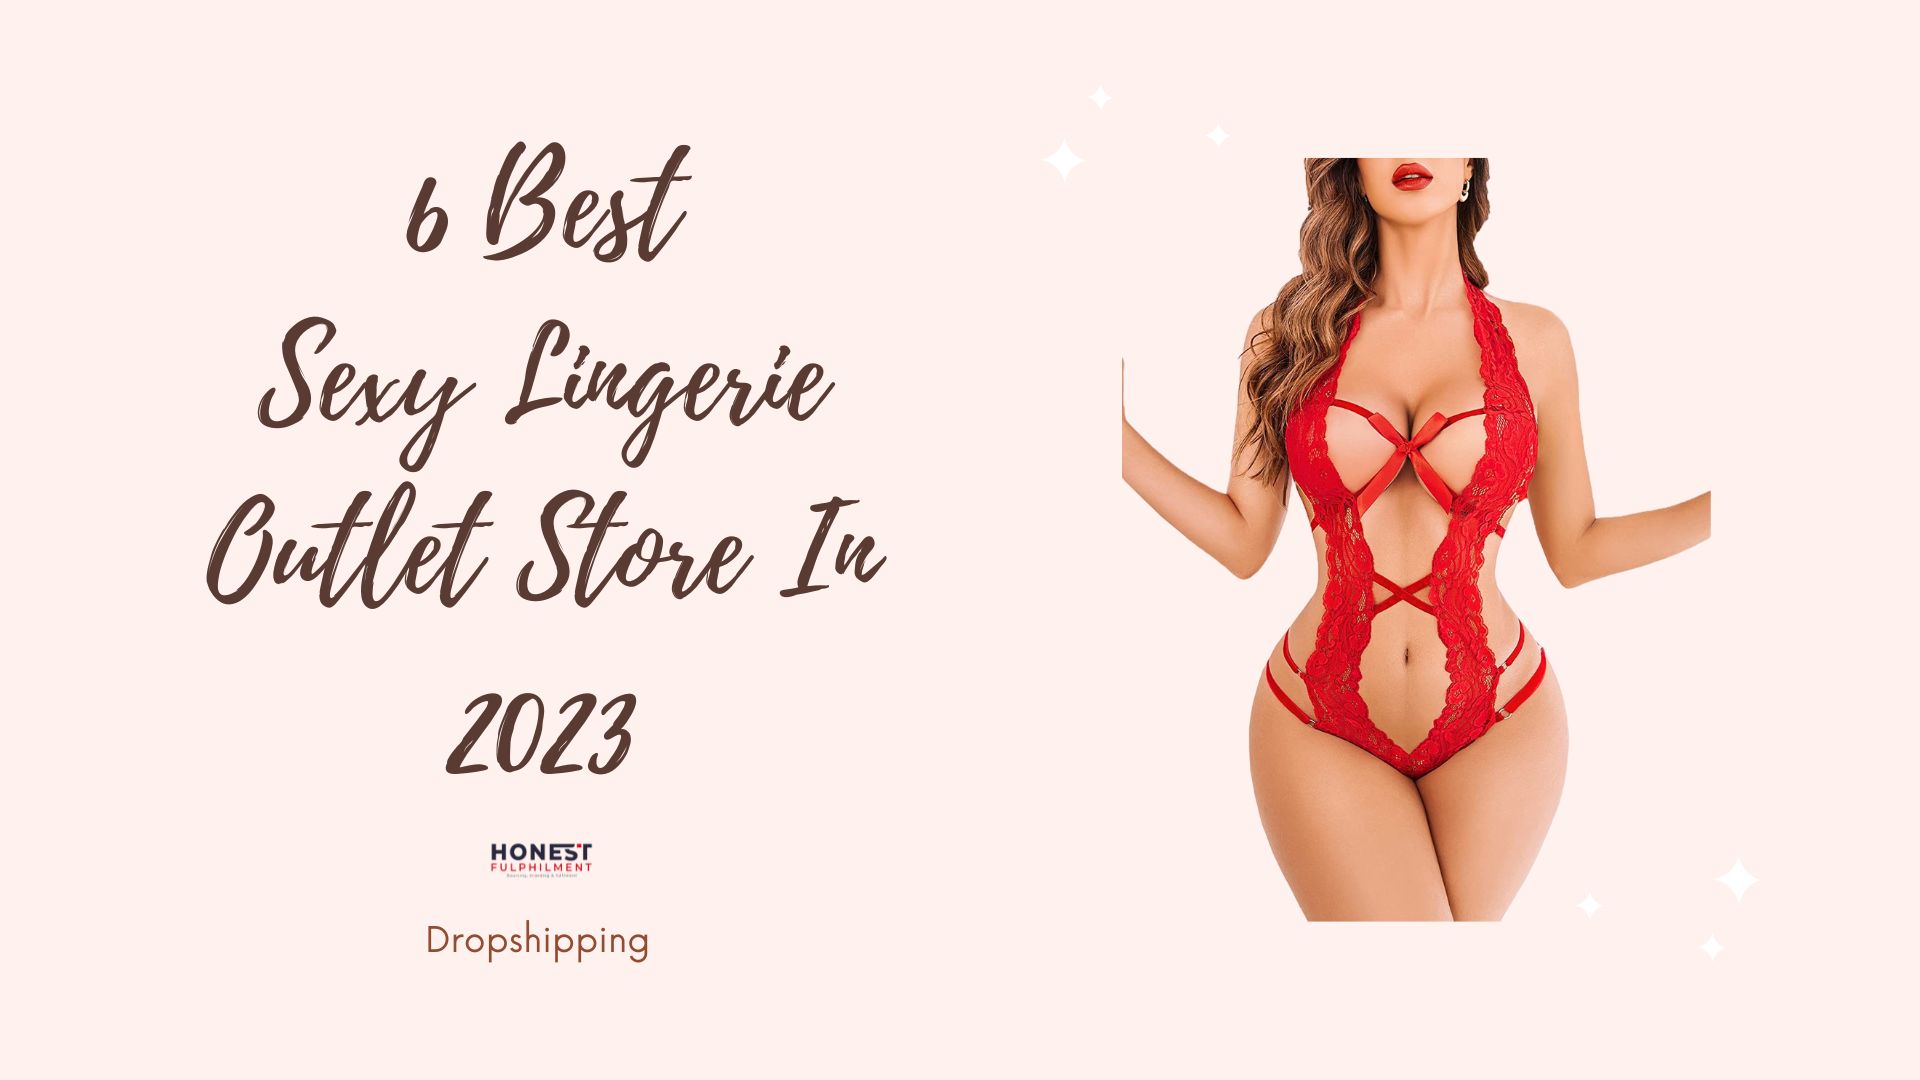 6 Best Sexy Lingerie Outlet Store In 2023